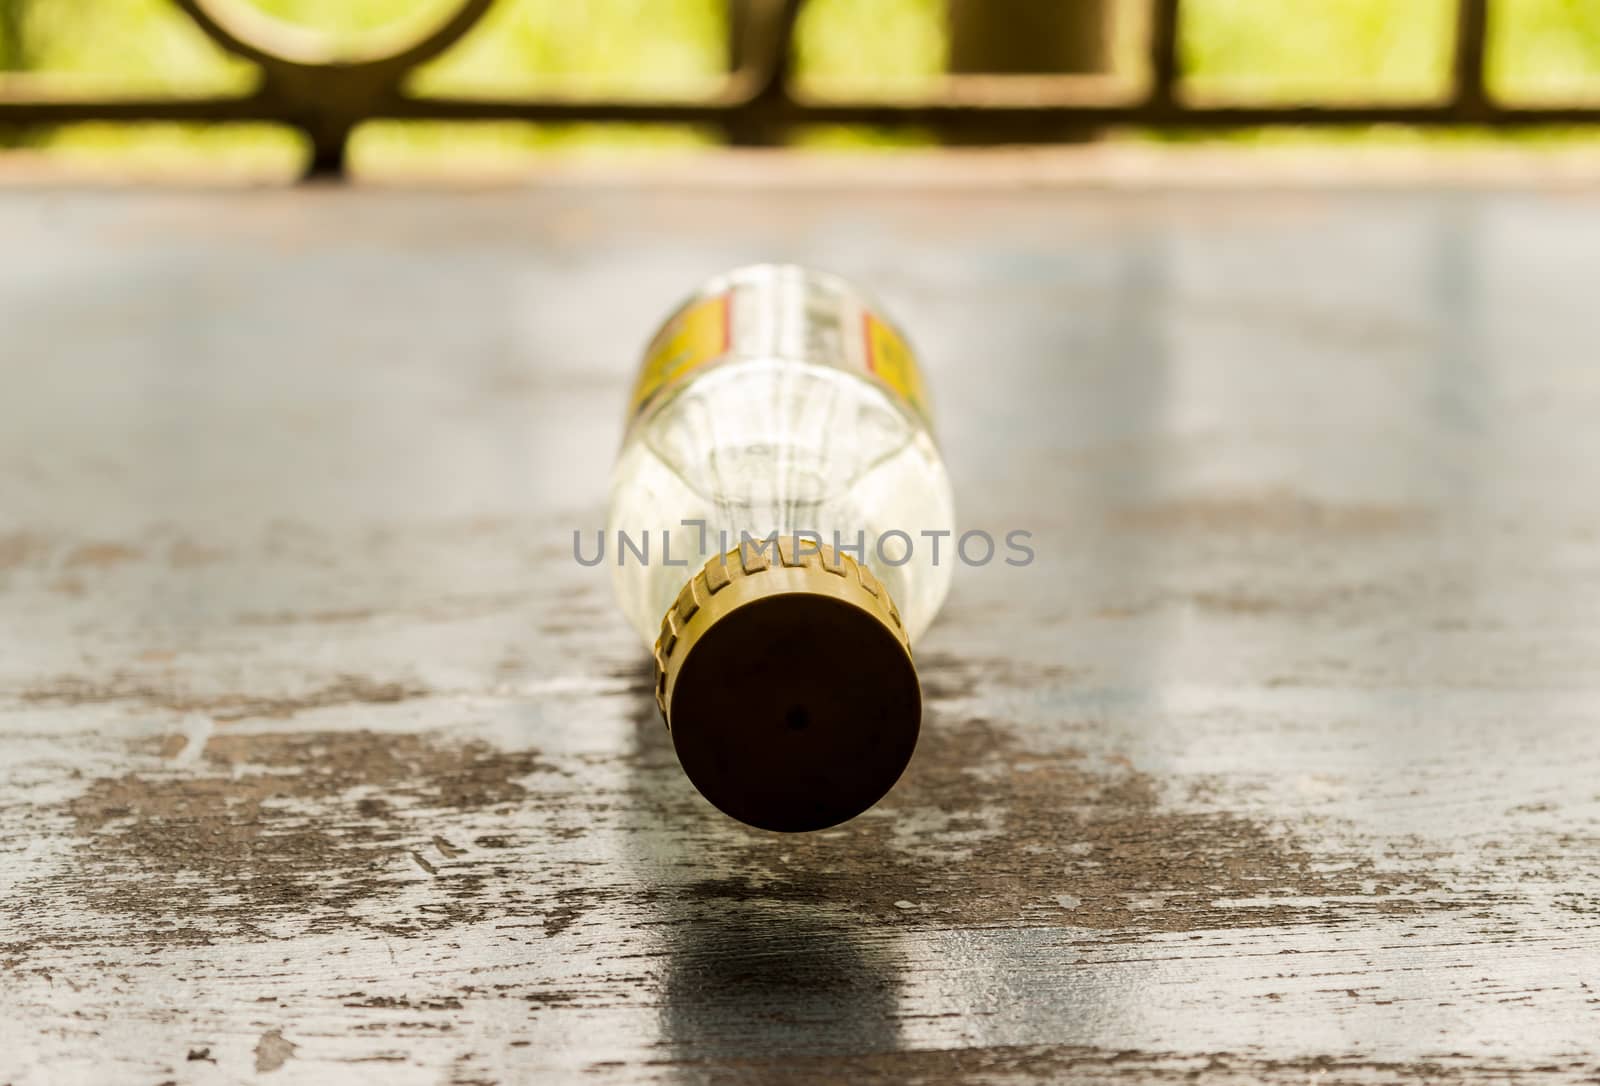 Glass bottle Lying on rustic floor. Still Life. Selective focus. Shallow depth of field.